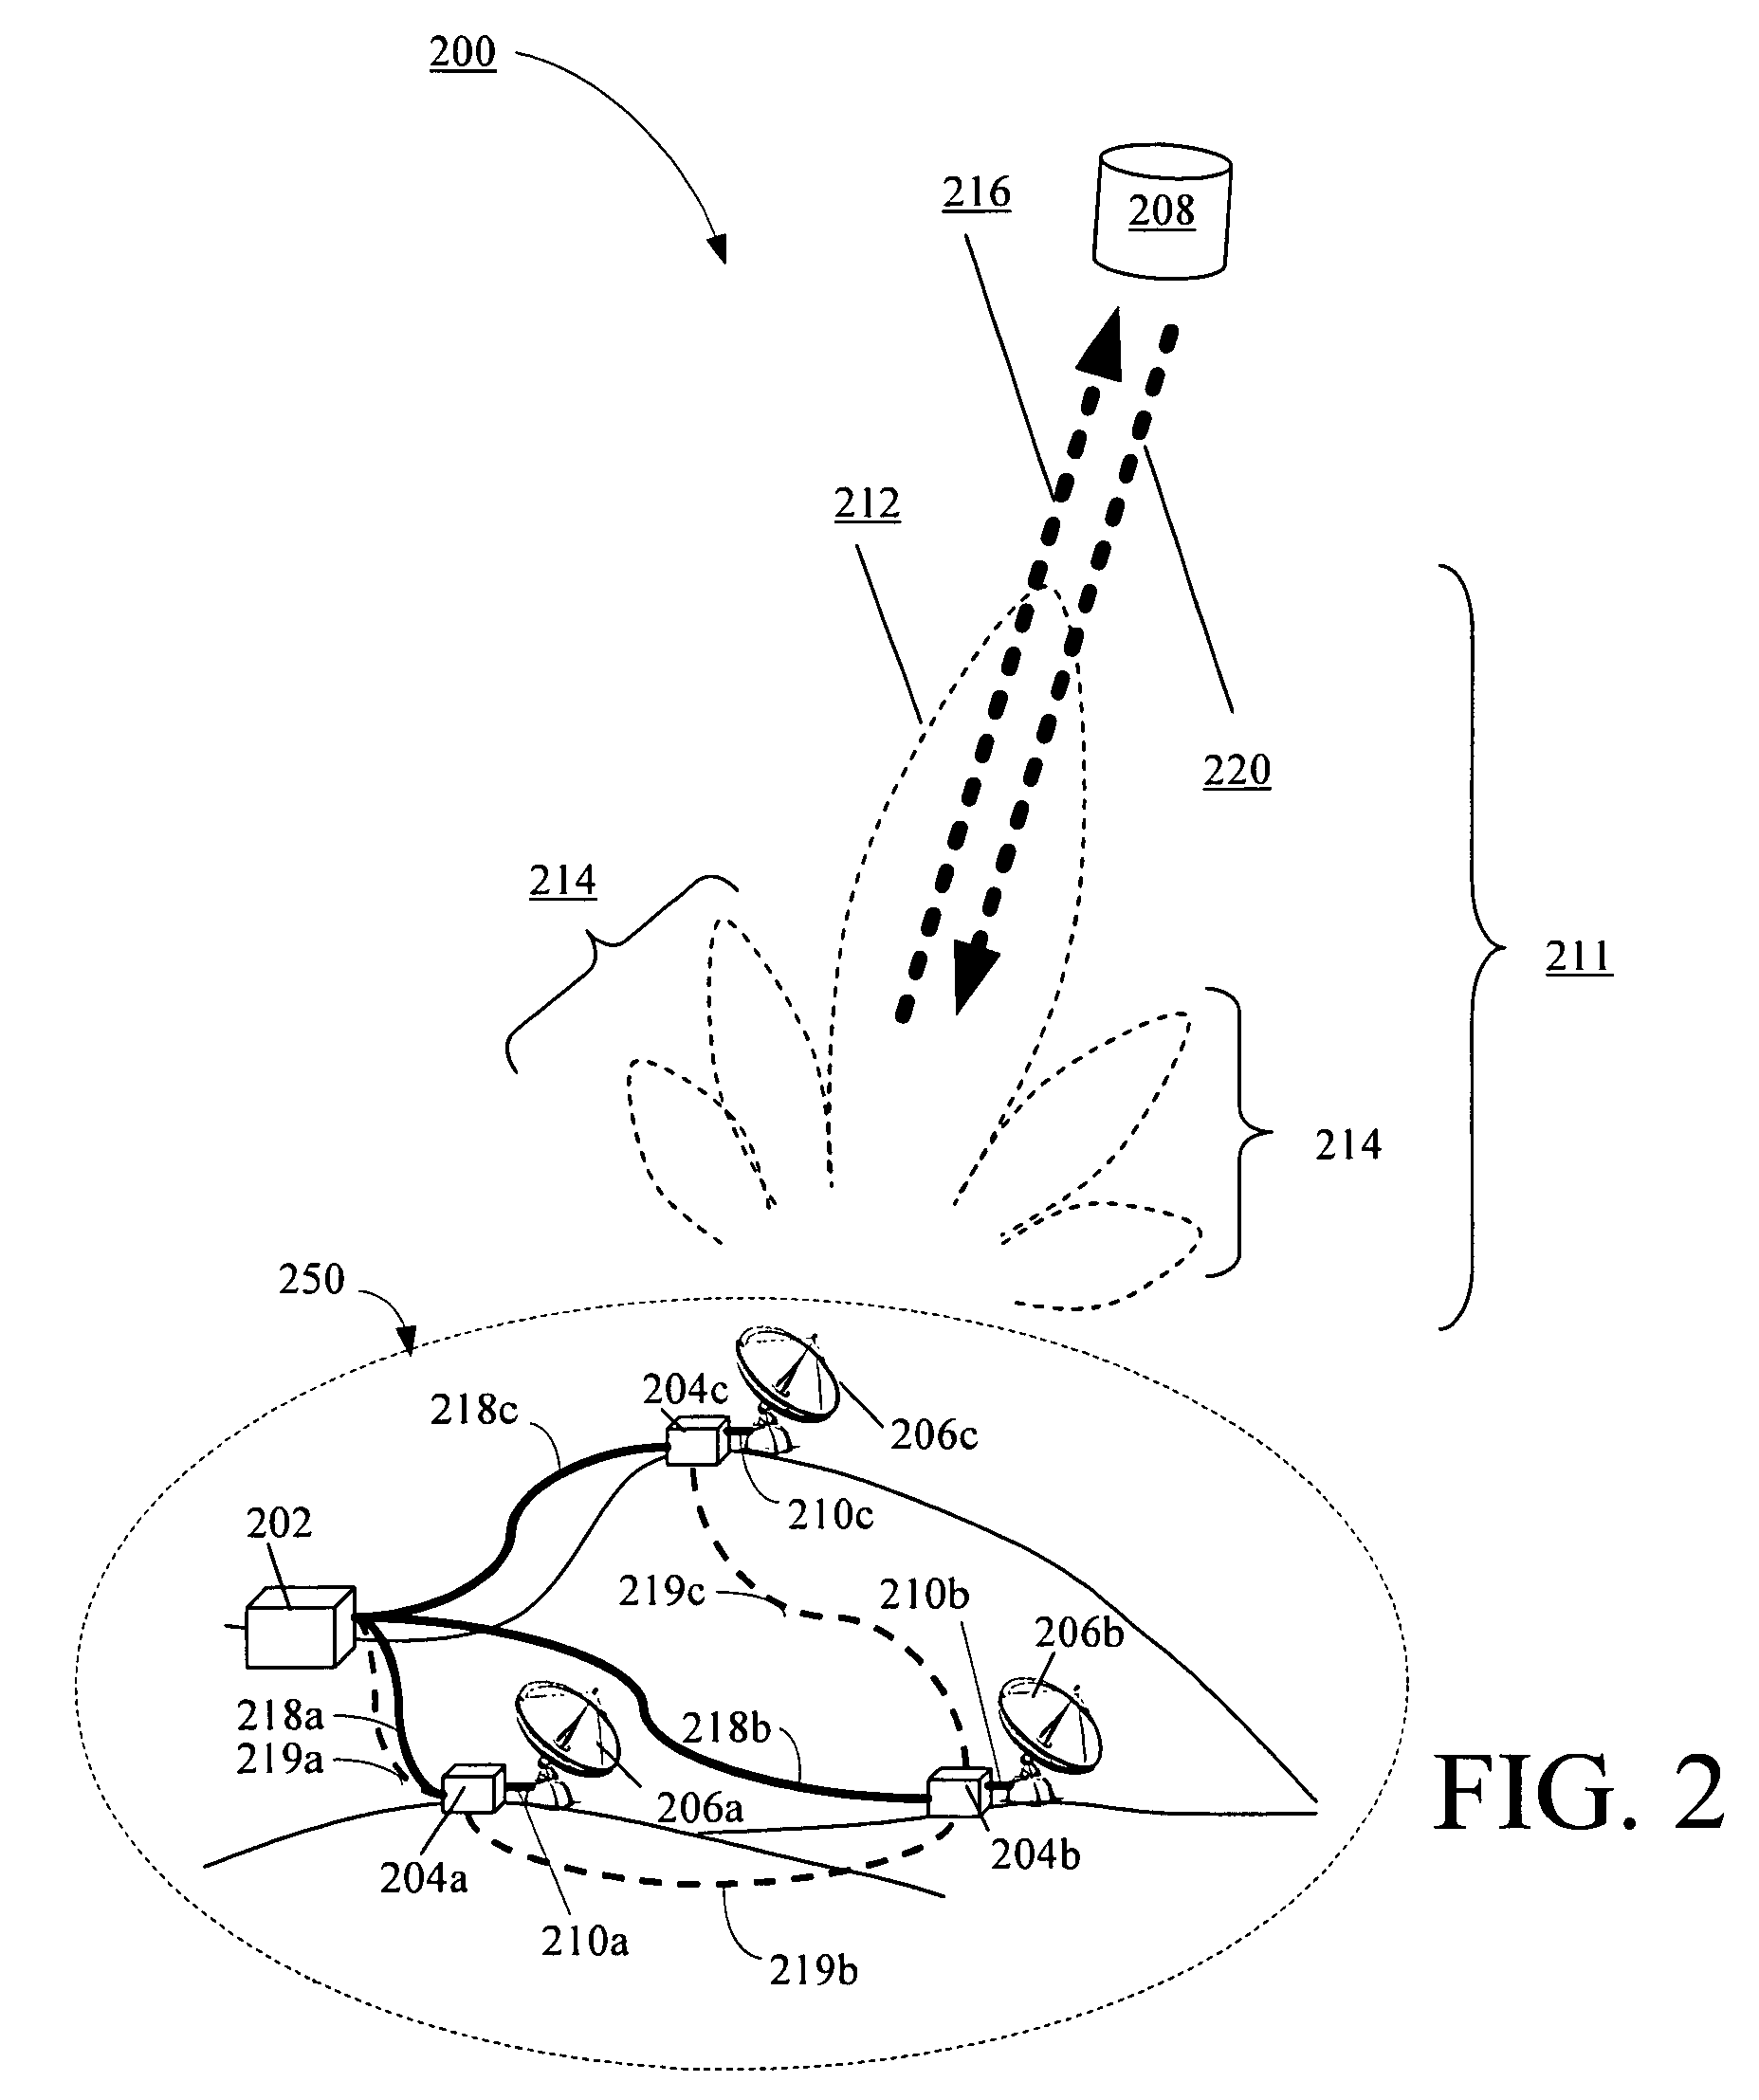 Compensation of beamforming errors in a communications system having widely spaced antenna elements